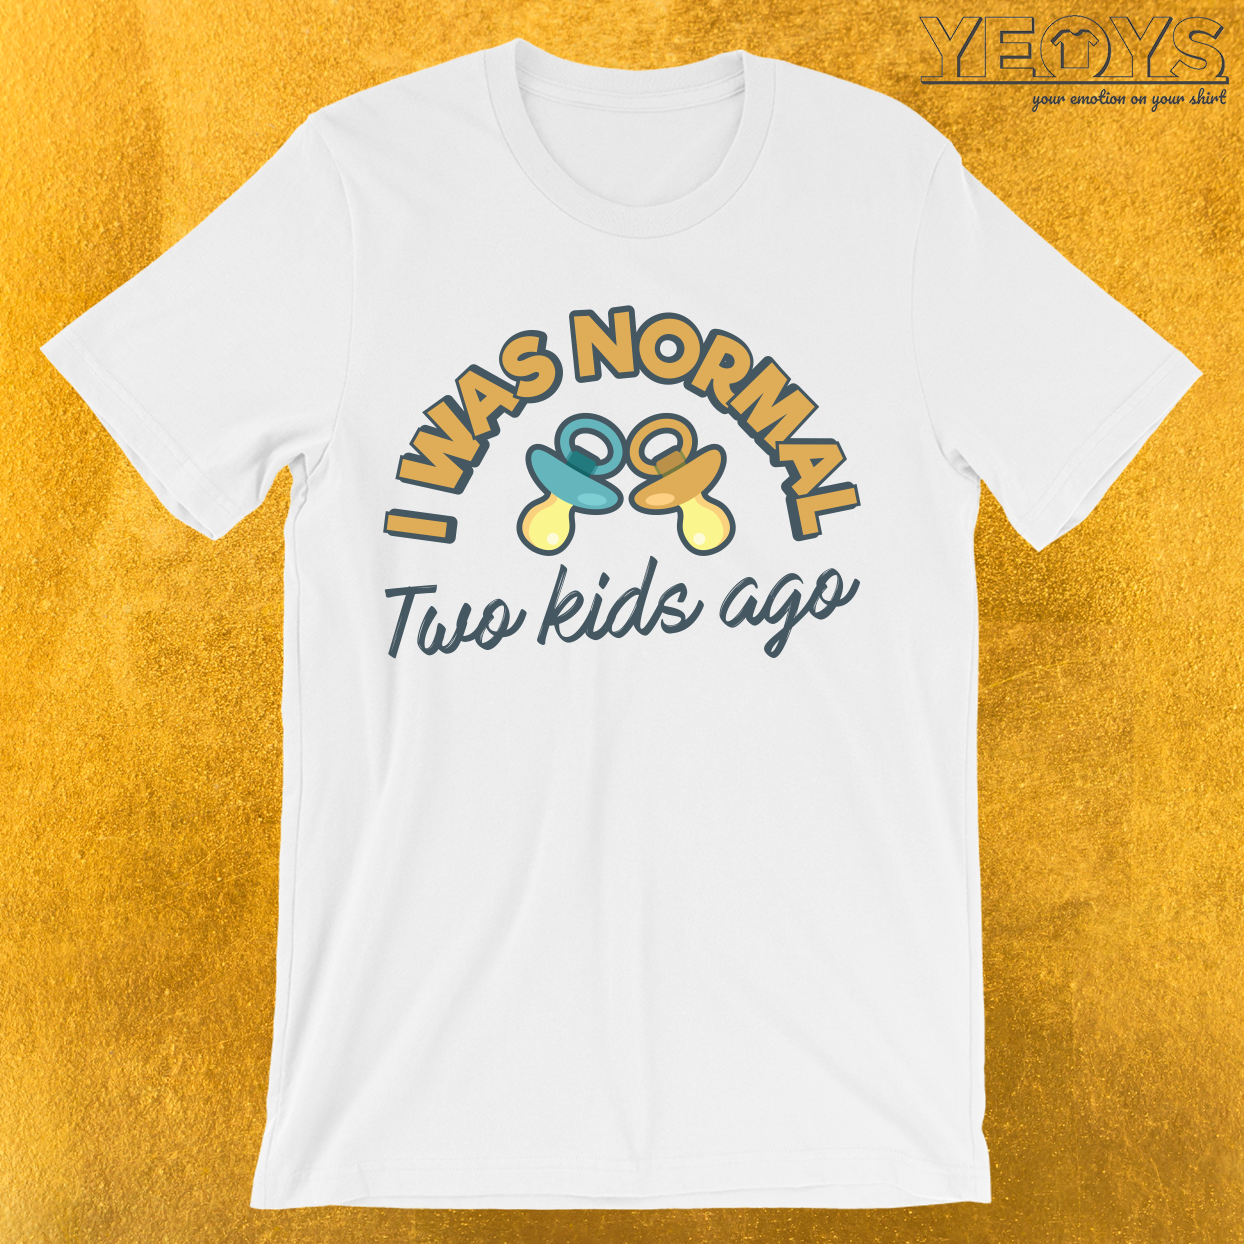 I Was Normal Two Kids Ago T-Shirt